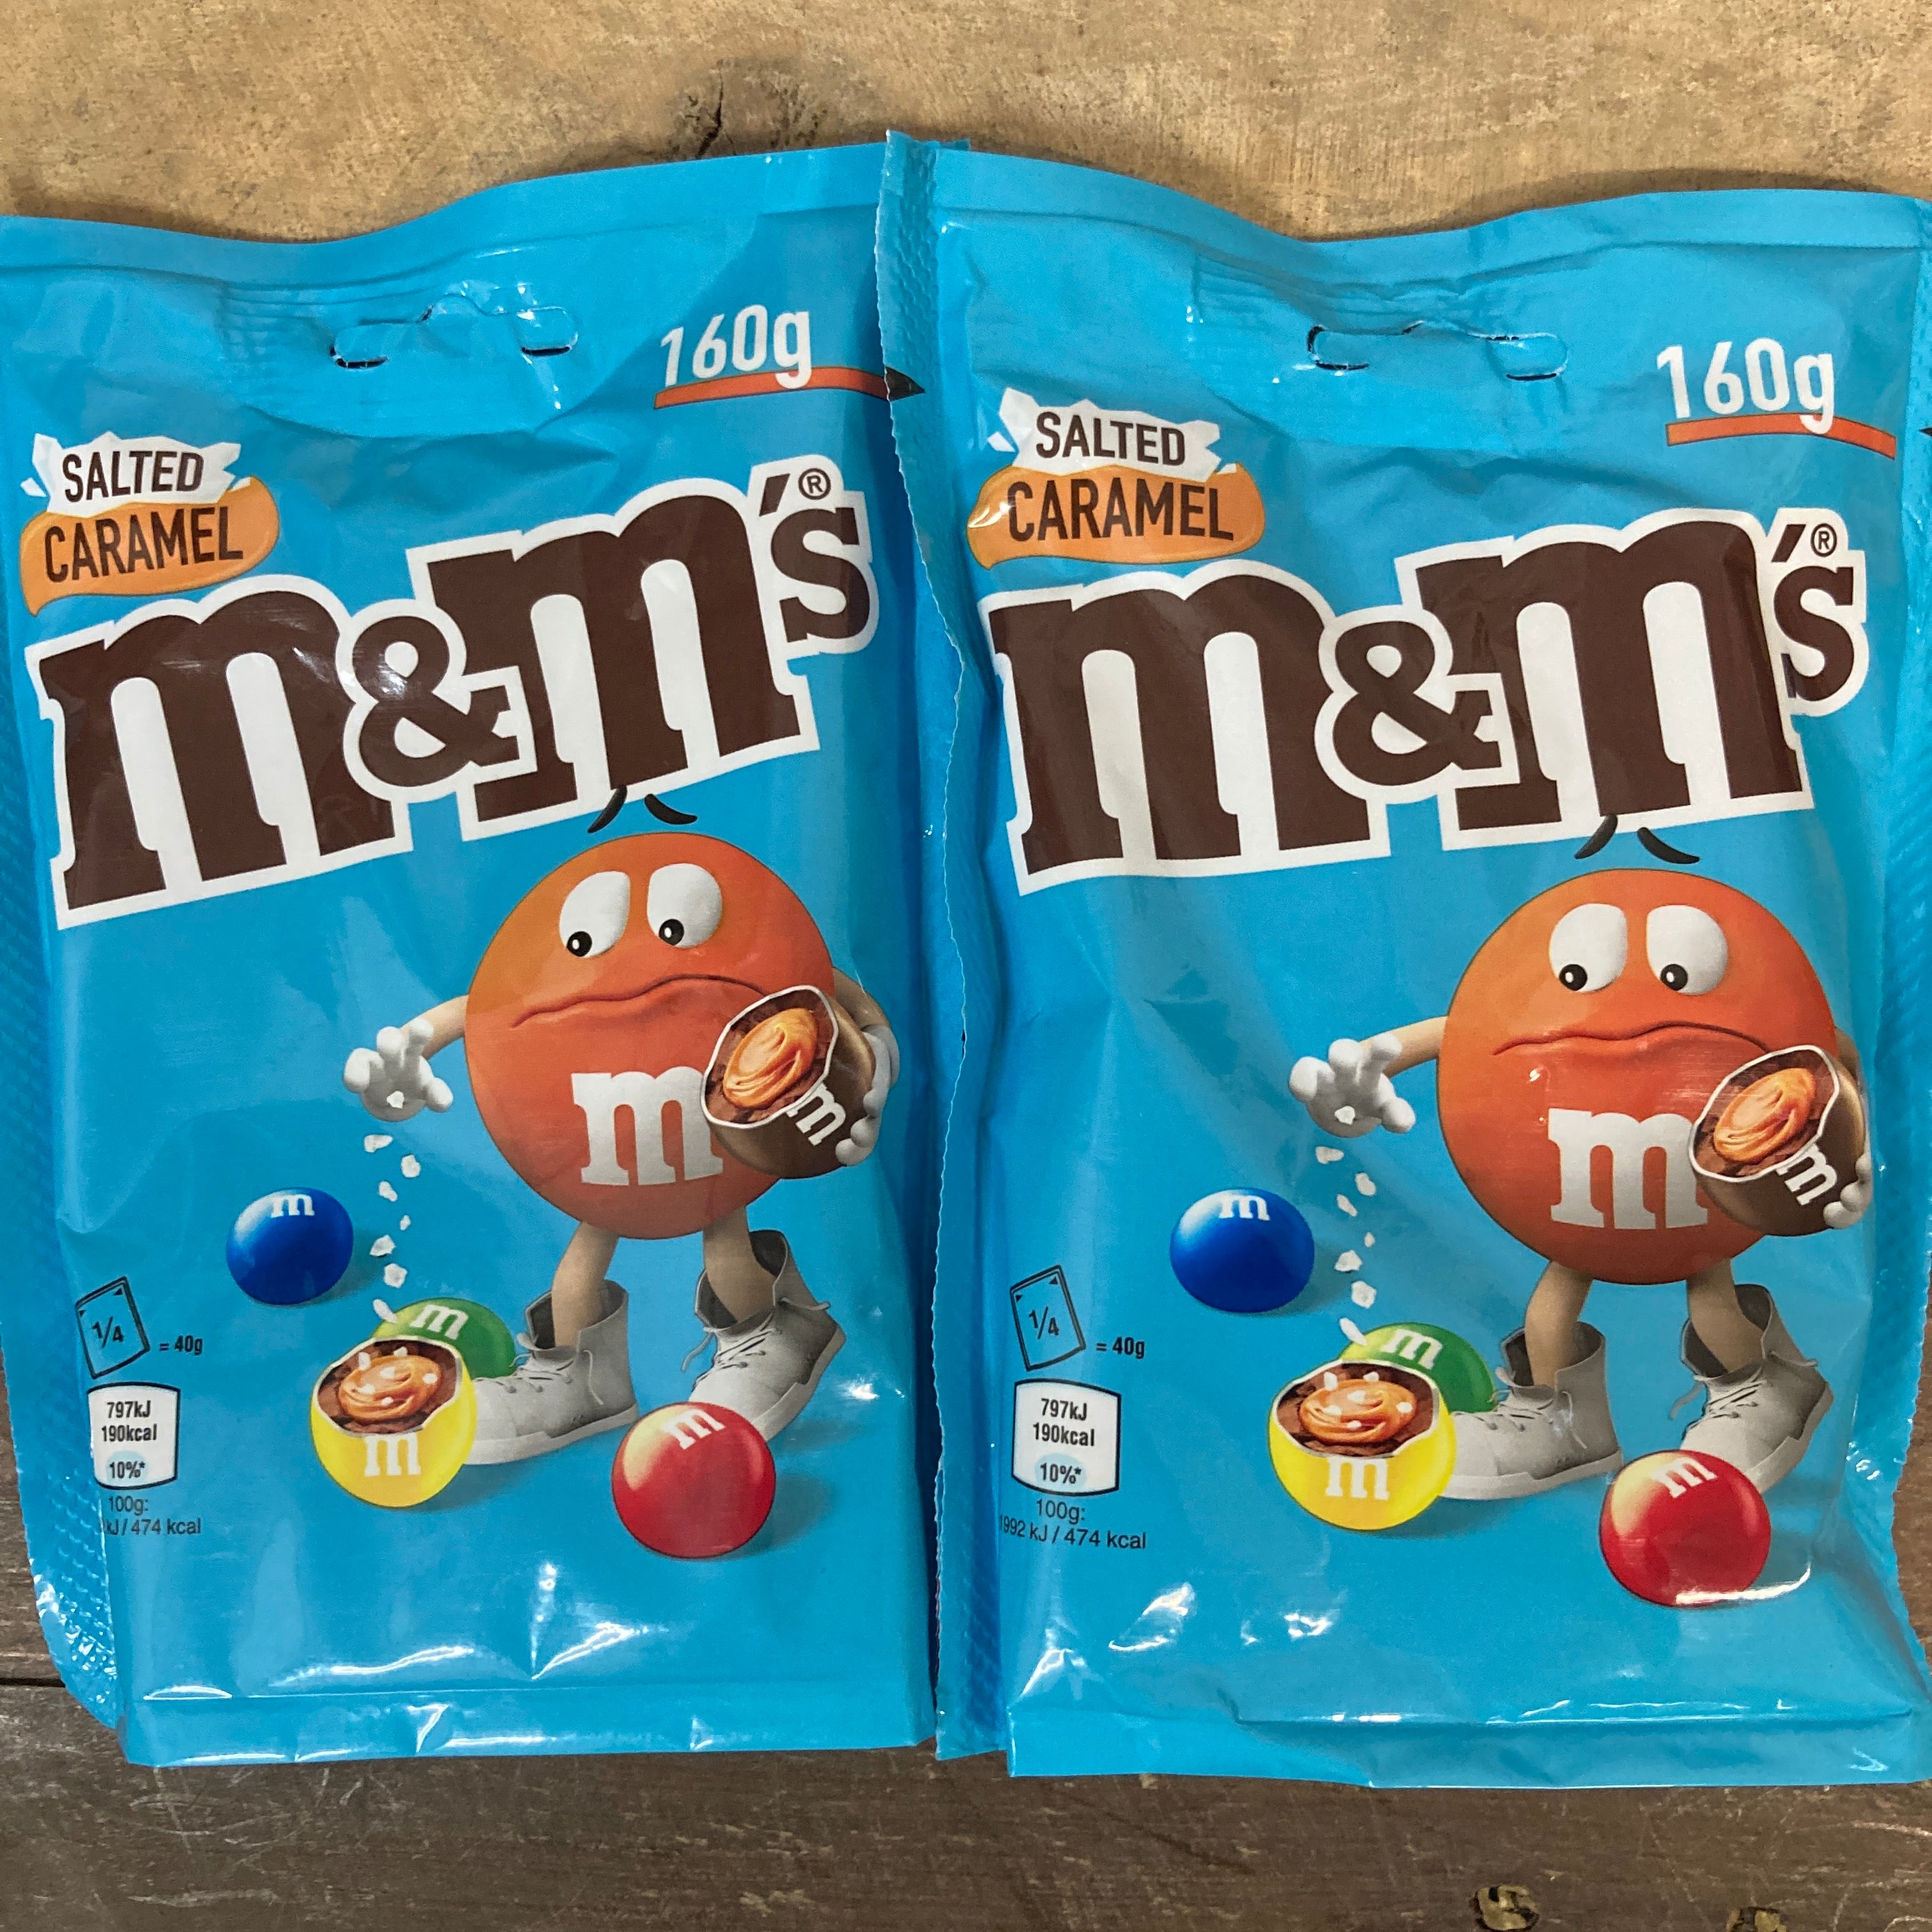 M&M unveils a limited edition salted caramel flavour • it's a Sher